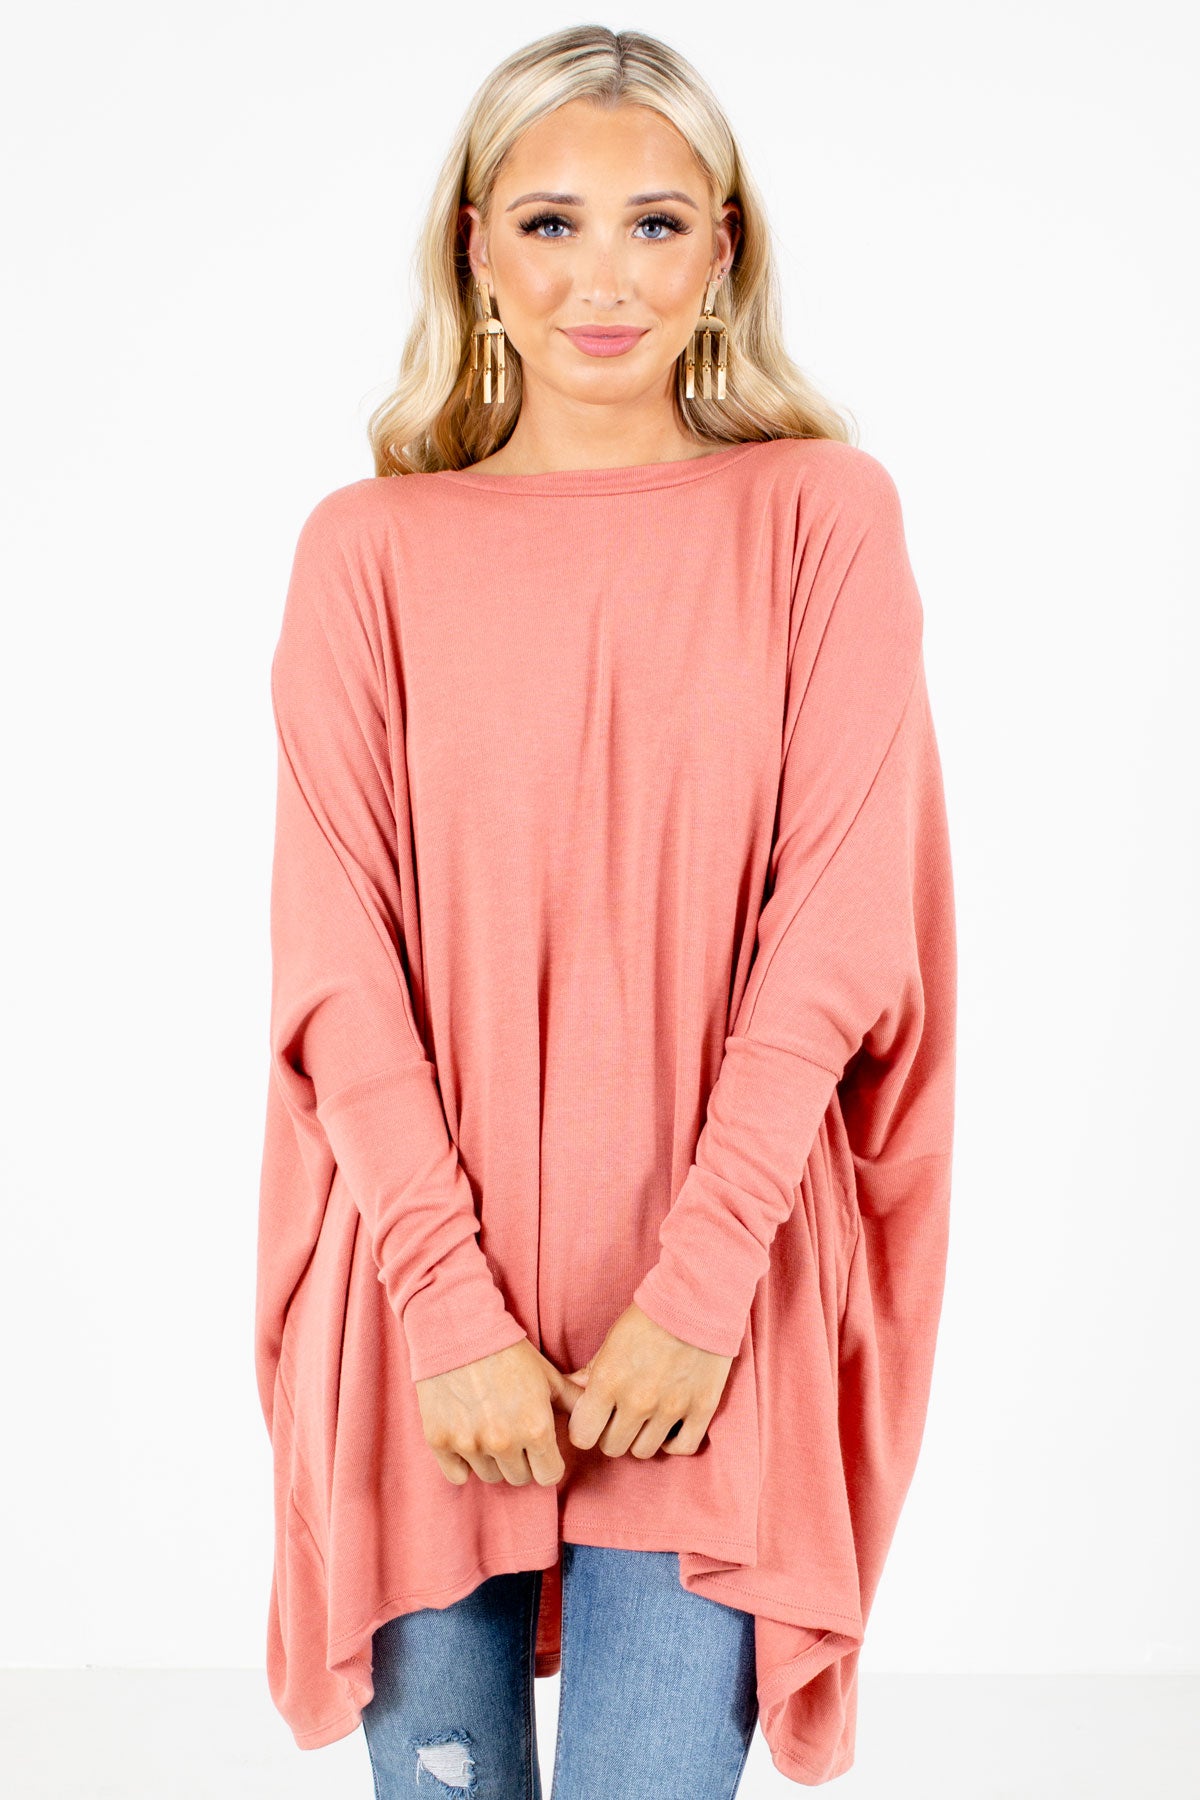 Pink Long Sleeve Boutique Tops for Women